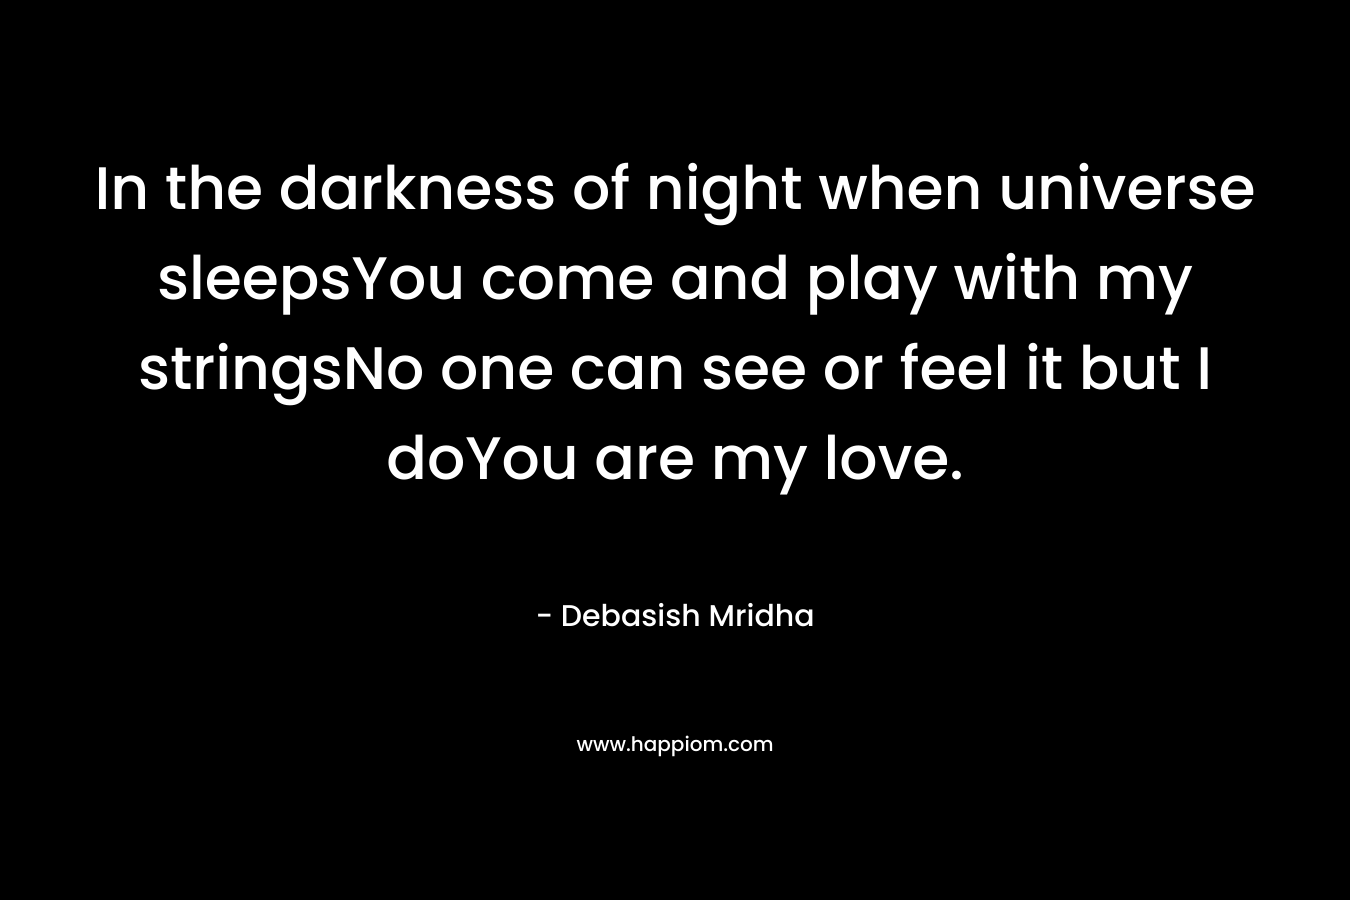 In the darkness of night when universe sleepsYou come and play with my stringsNo one can see or feel it but I doYou are my love.